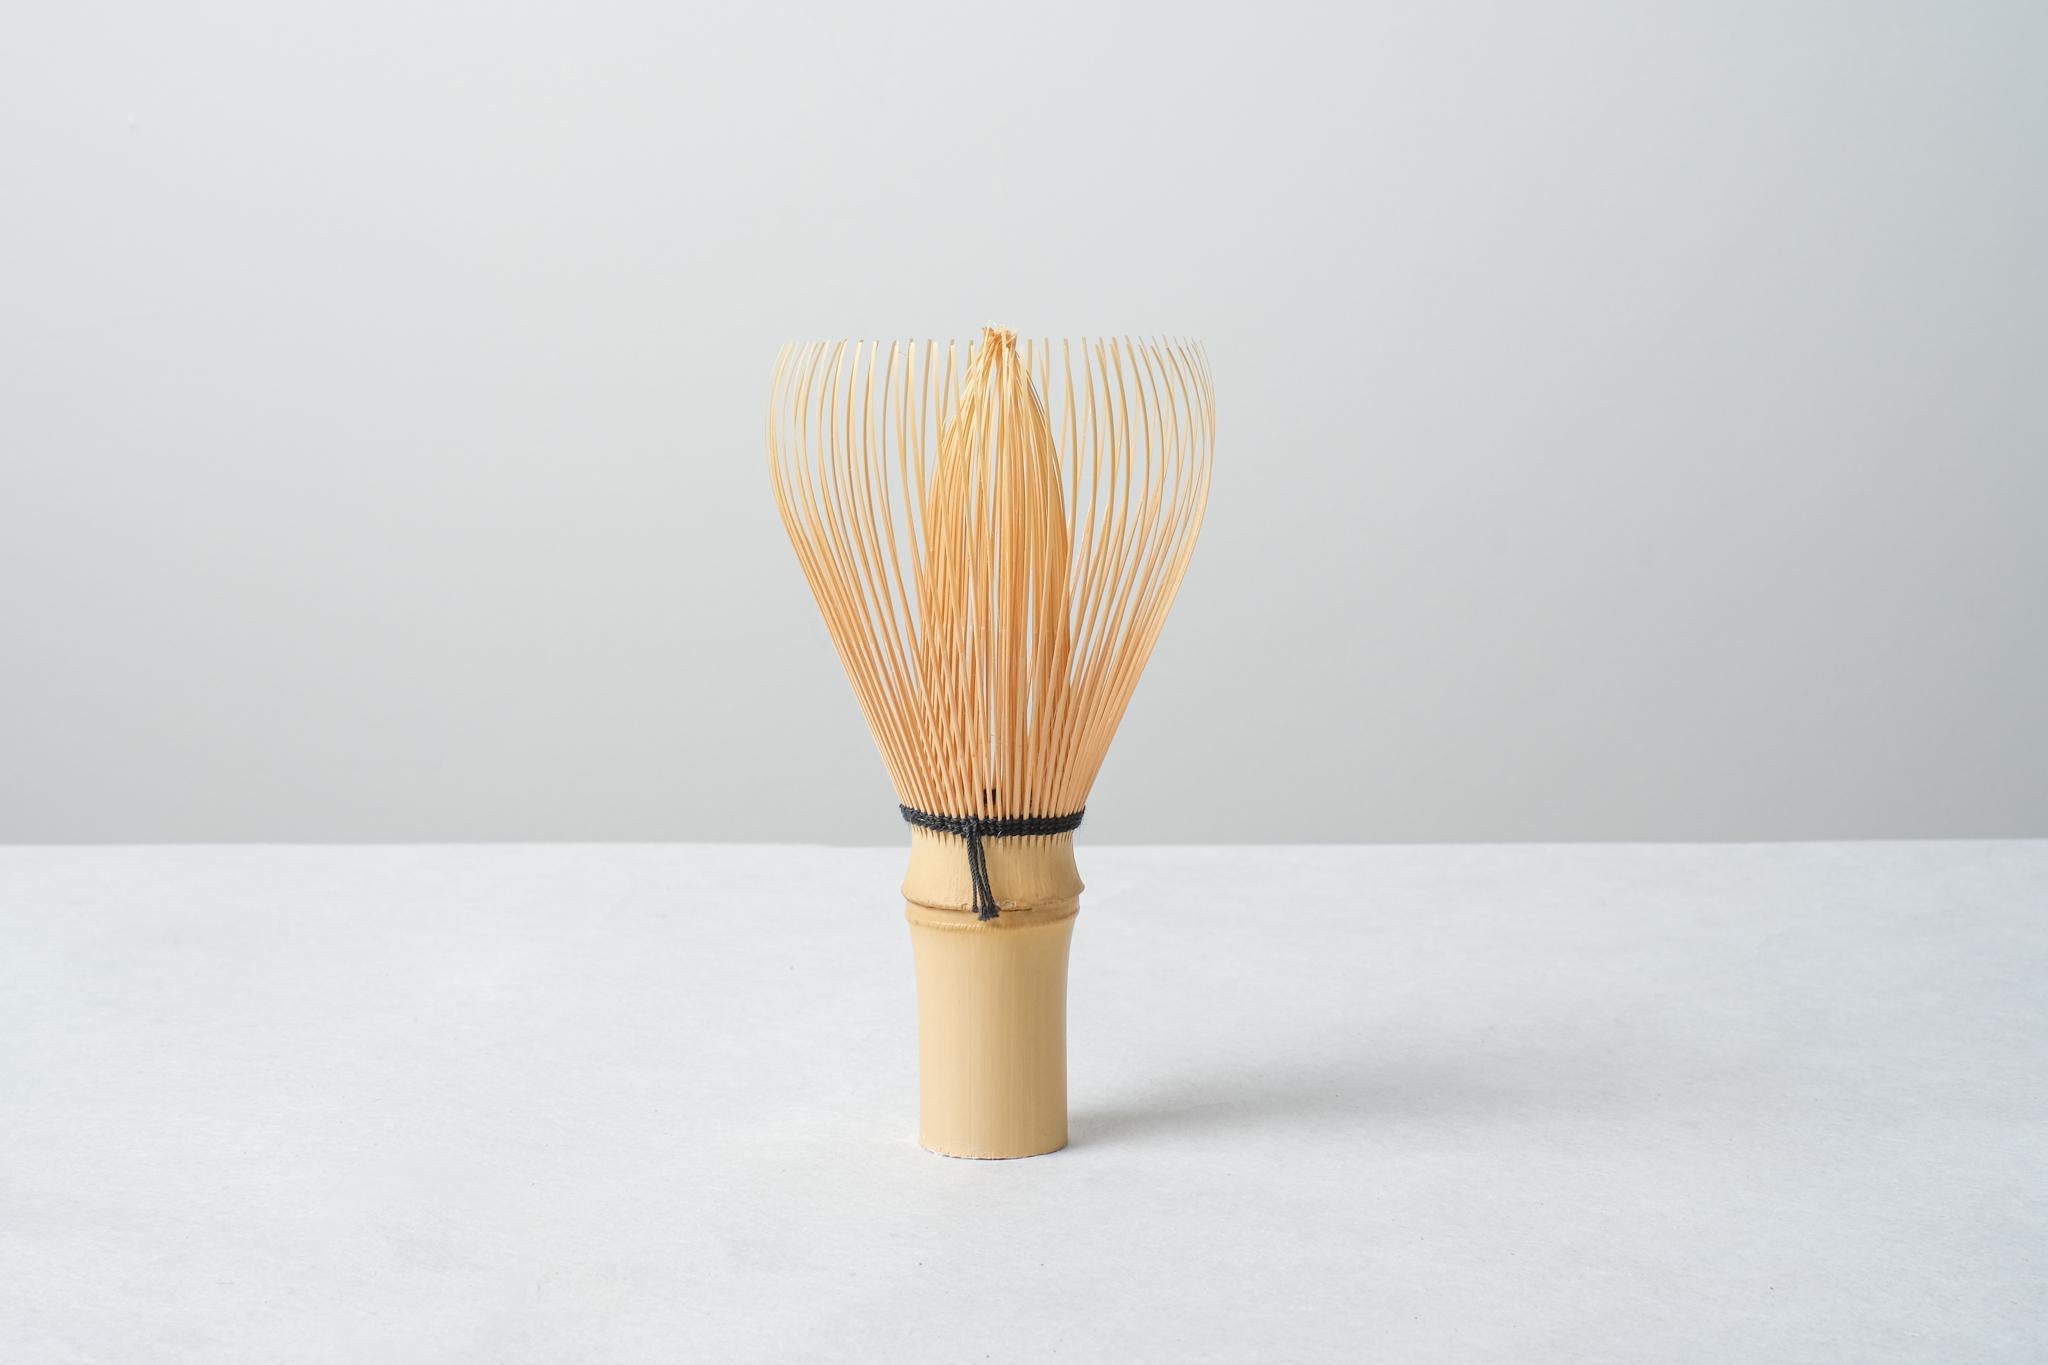 Bamboo Matcha Whisk - Chasen - The Steeping Room